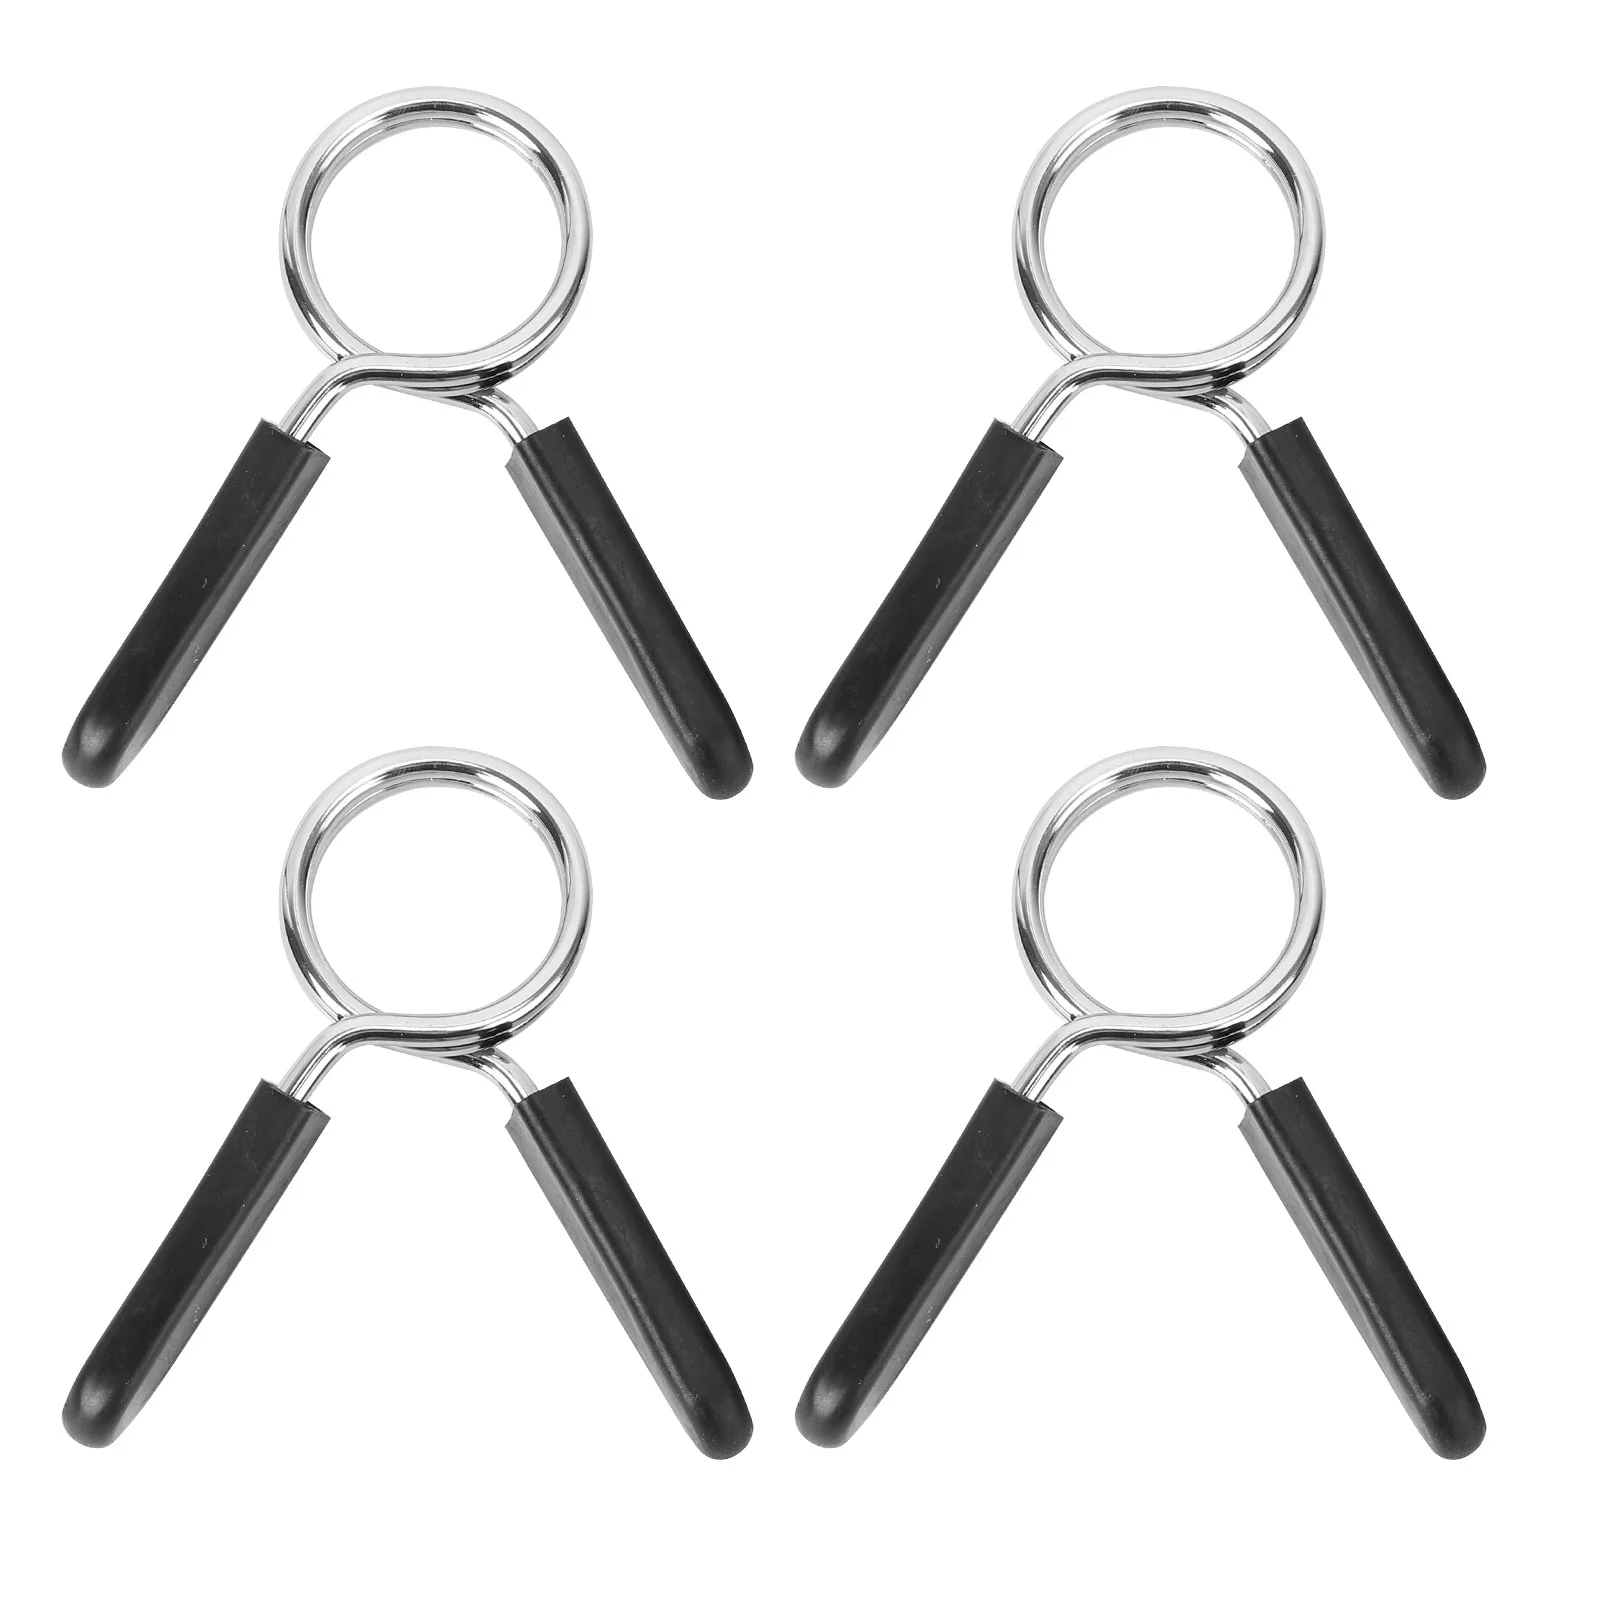 

4pcs 28mm Dumbbell Barbell Clamps Spring Clip Collars for Powerlifting Cross Fit Weightlifting Gym